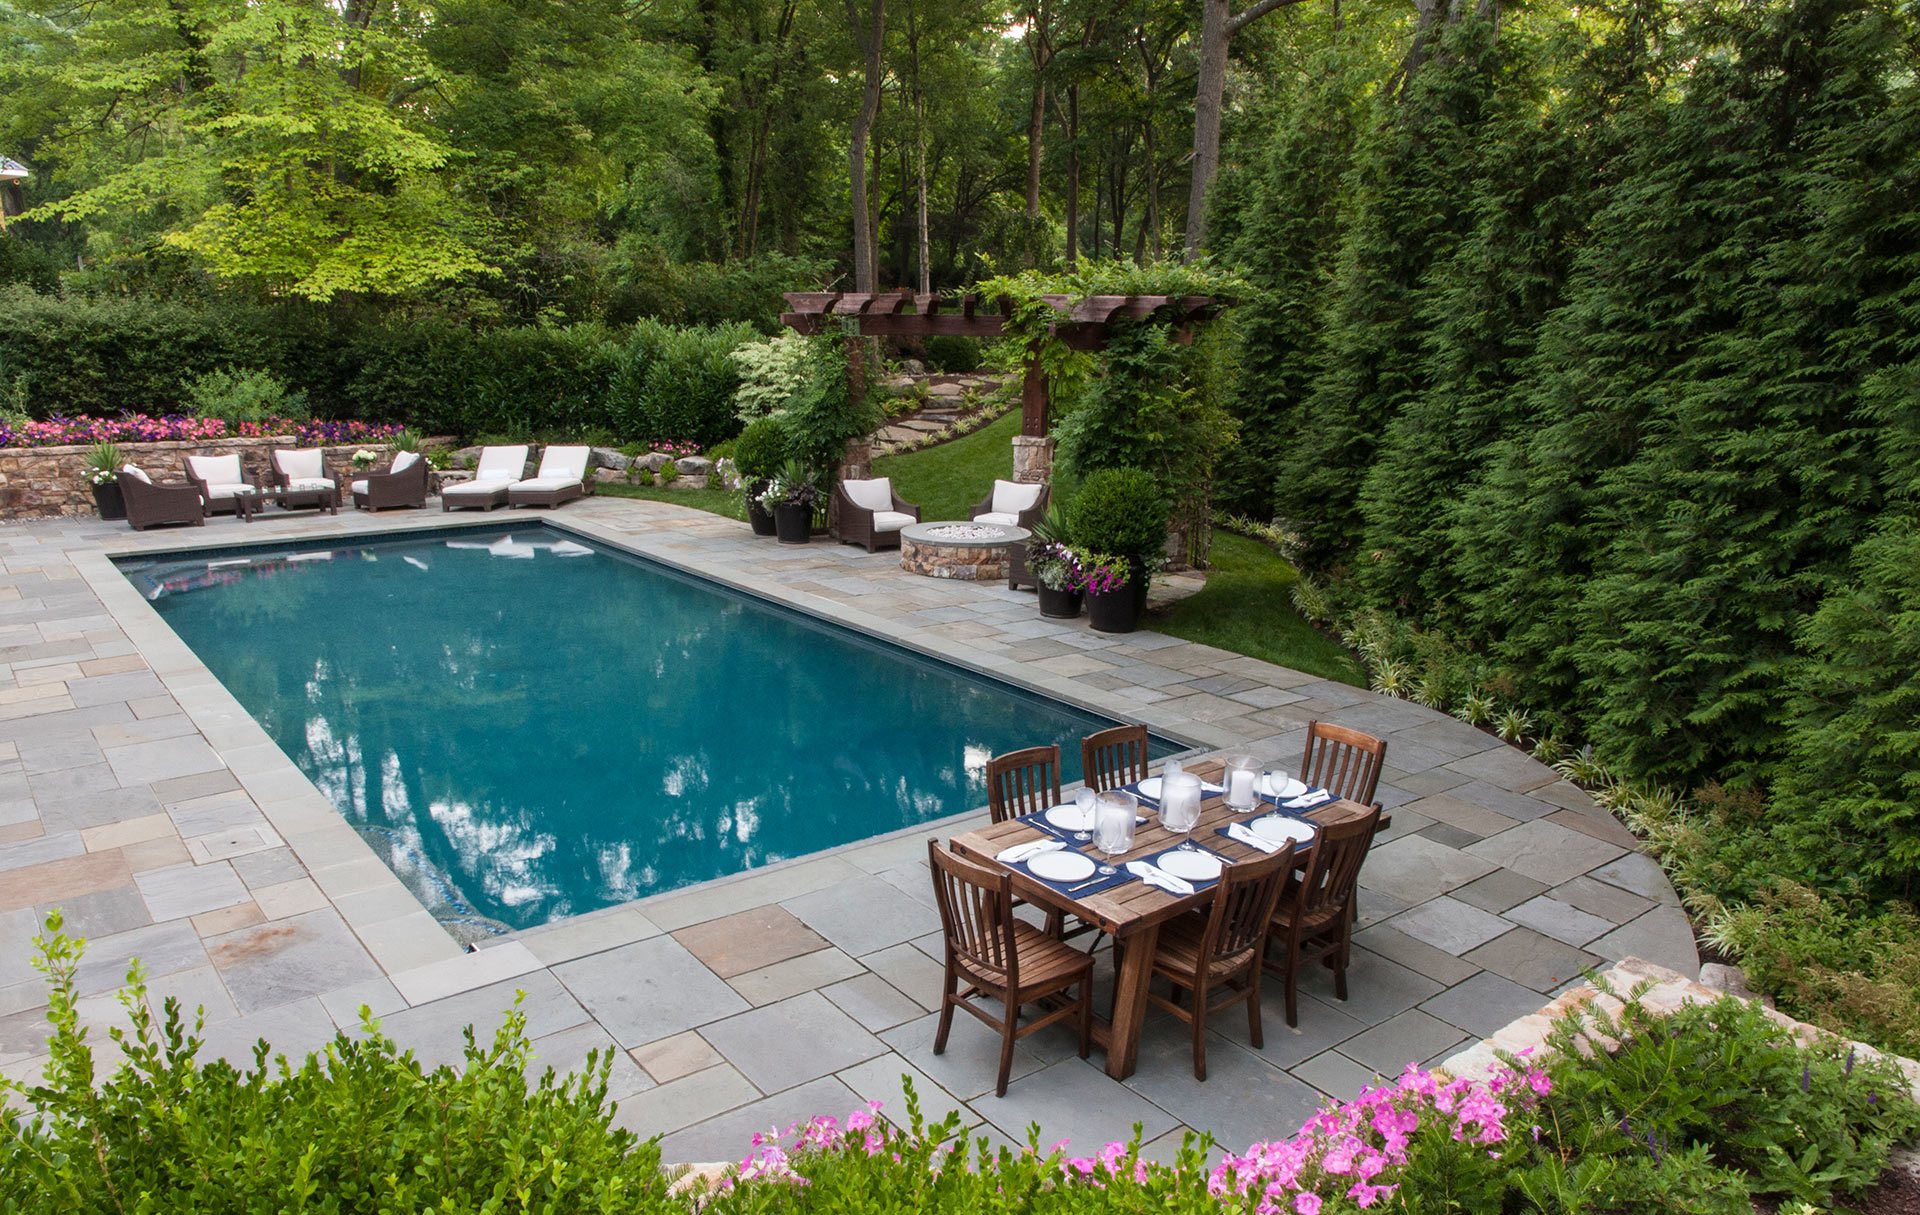 Pool in Backyard with Outdoor Furniture, Fire Place, Outdoor Furniture, and Landscaping